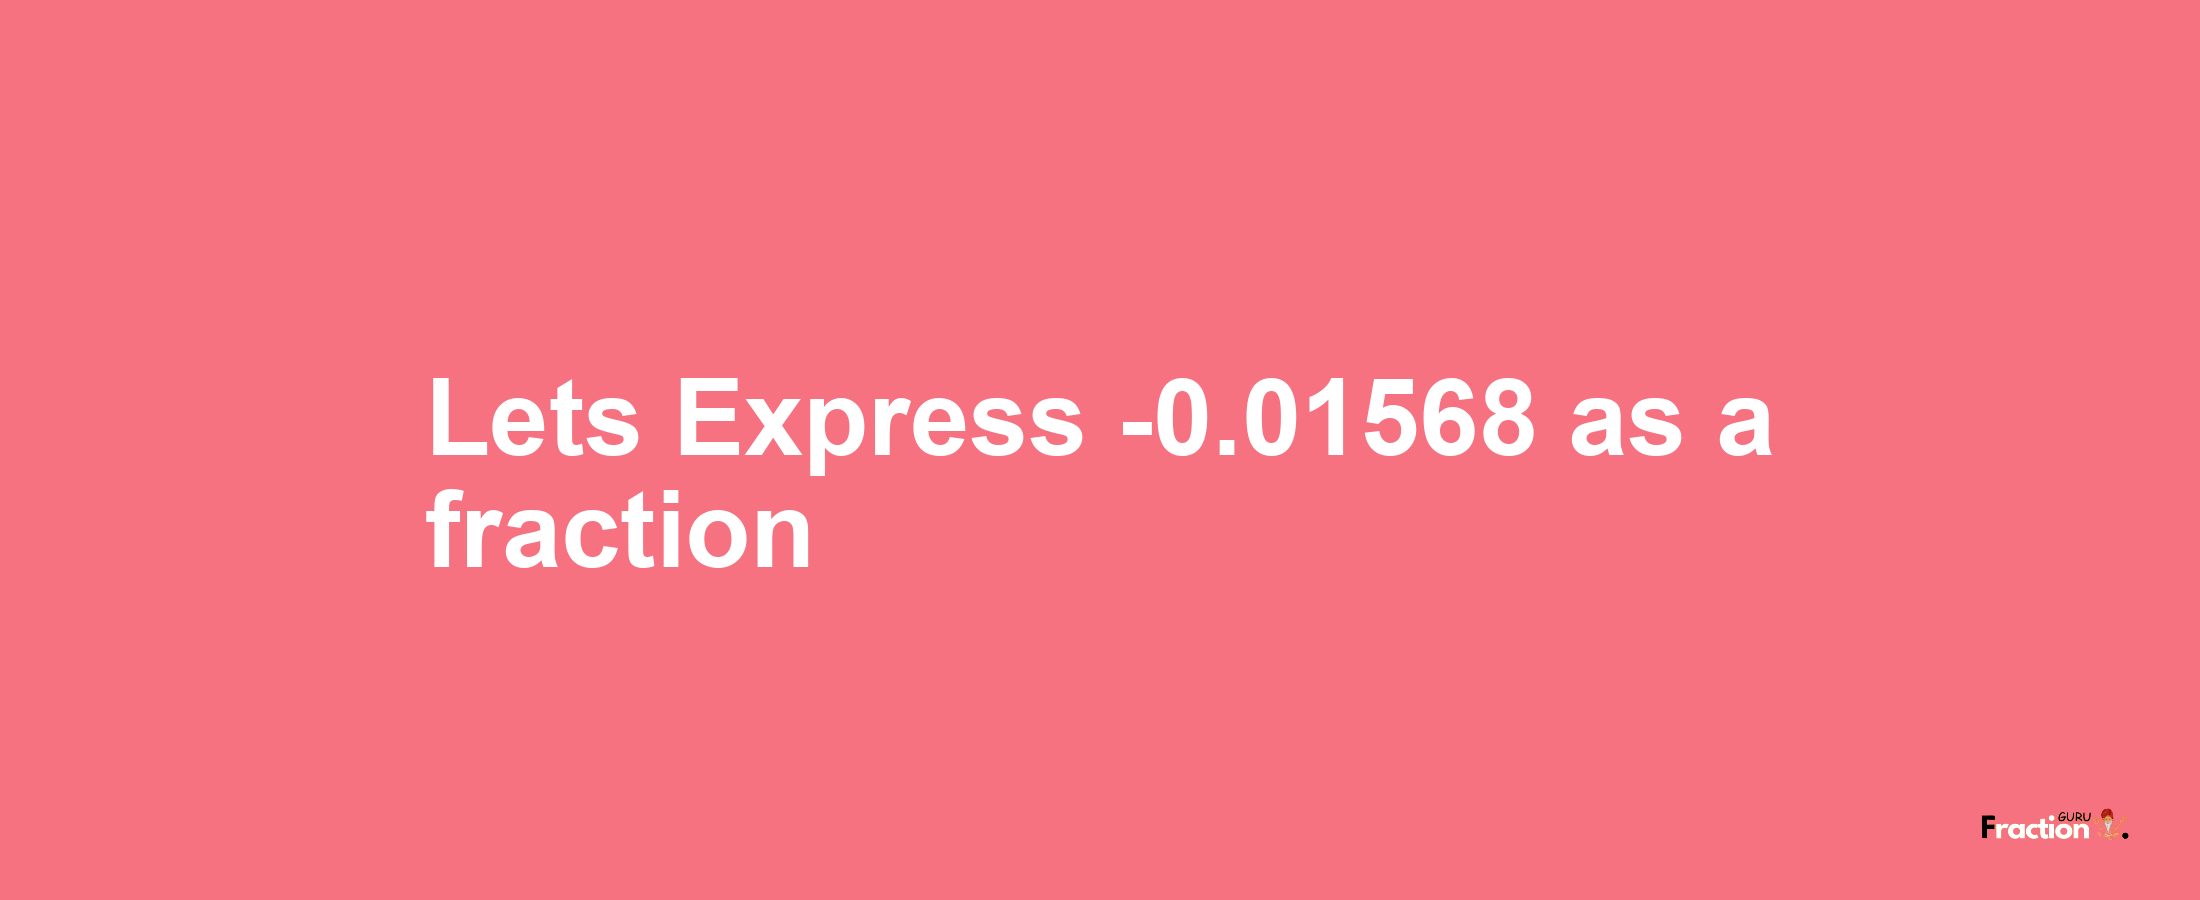 Lets Express -0.01568 as afraction